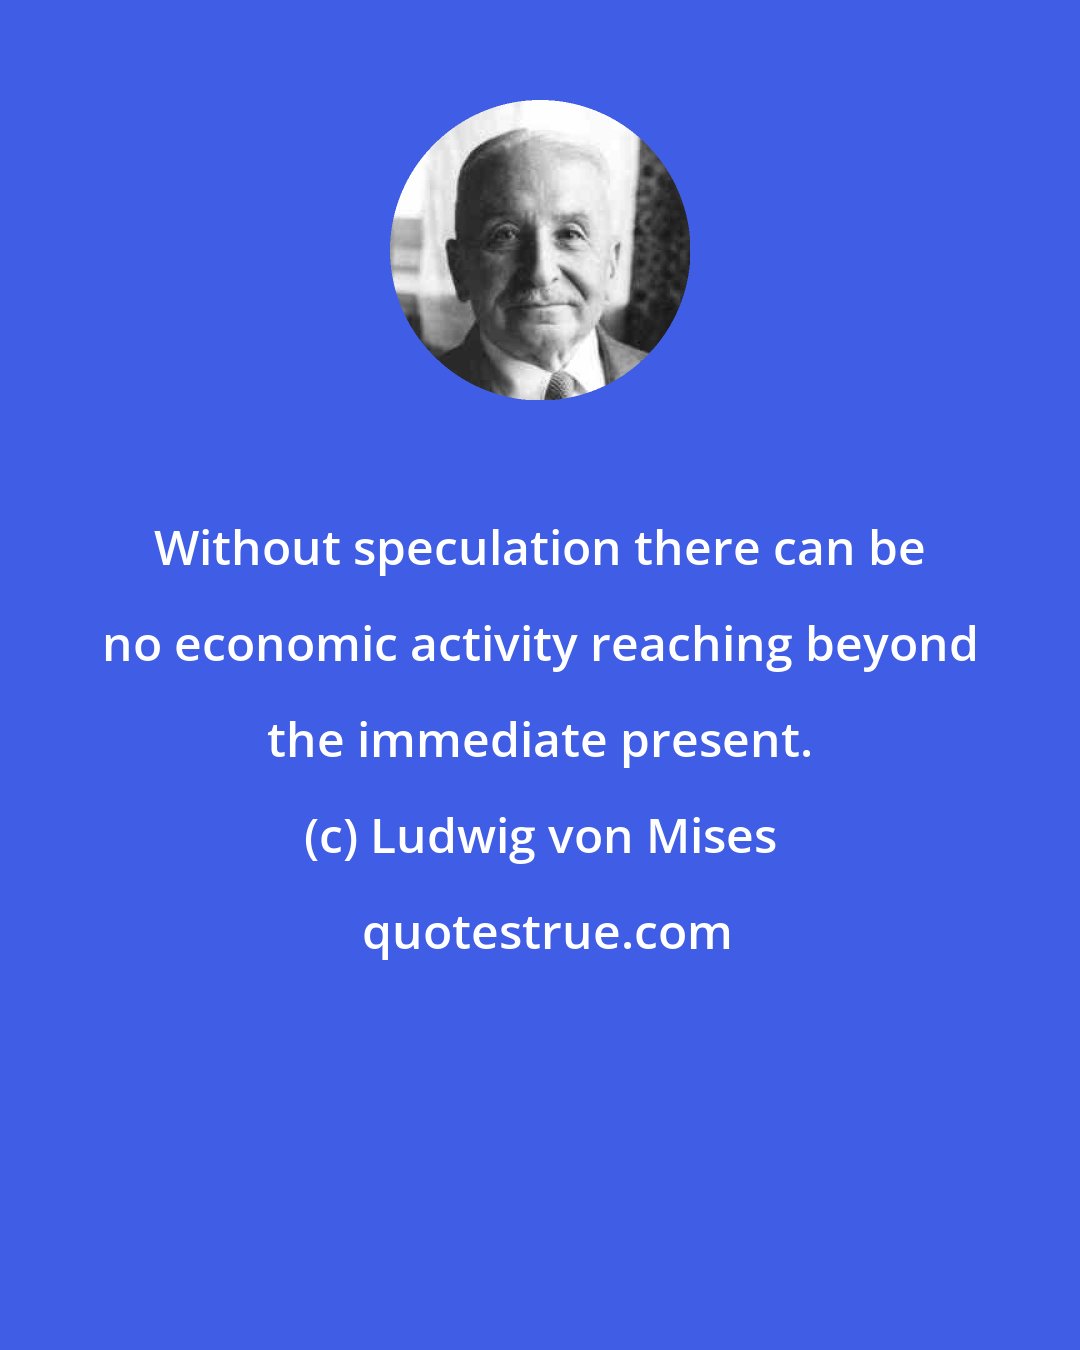 Ludwig von Mises: Without speculation there can be no economic activity reaching beyond the immediate present.